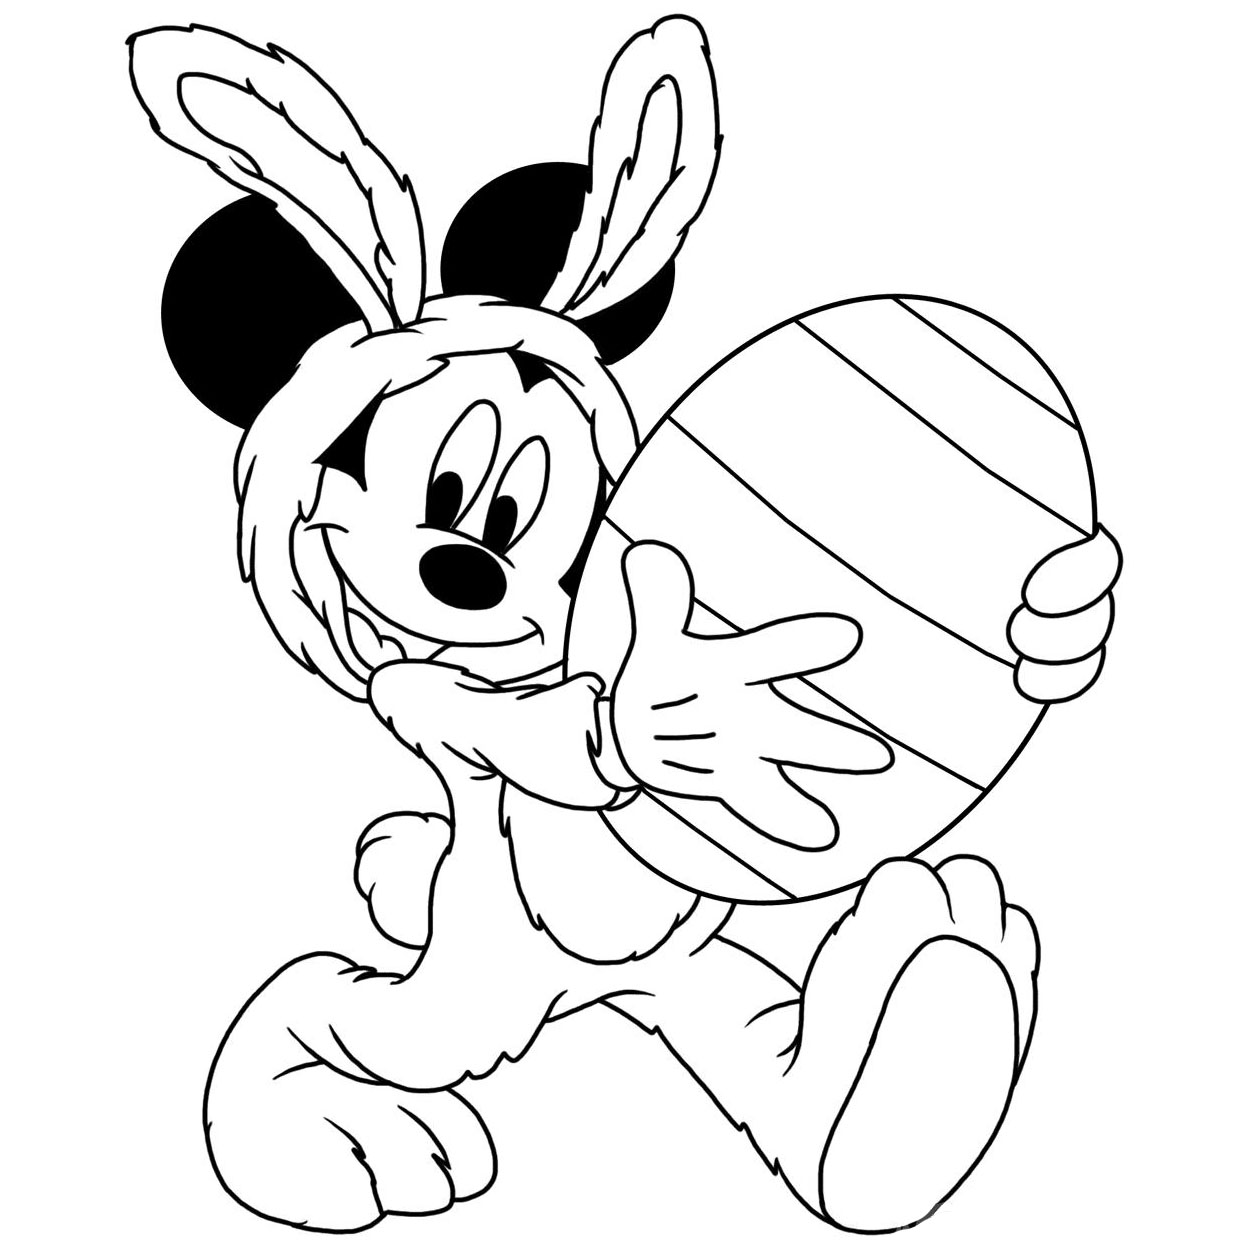 Free Disney Easter Coloring Pages Bunny Mickey Mouse with Easter Egg printable